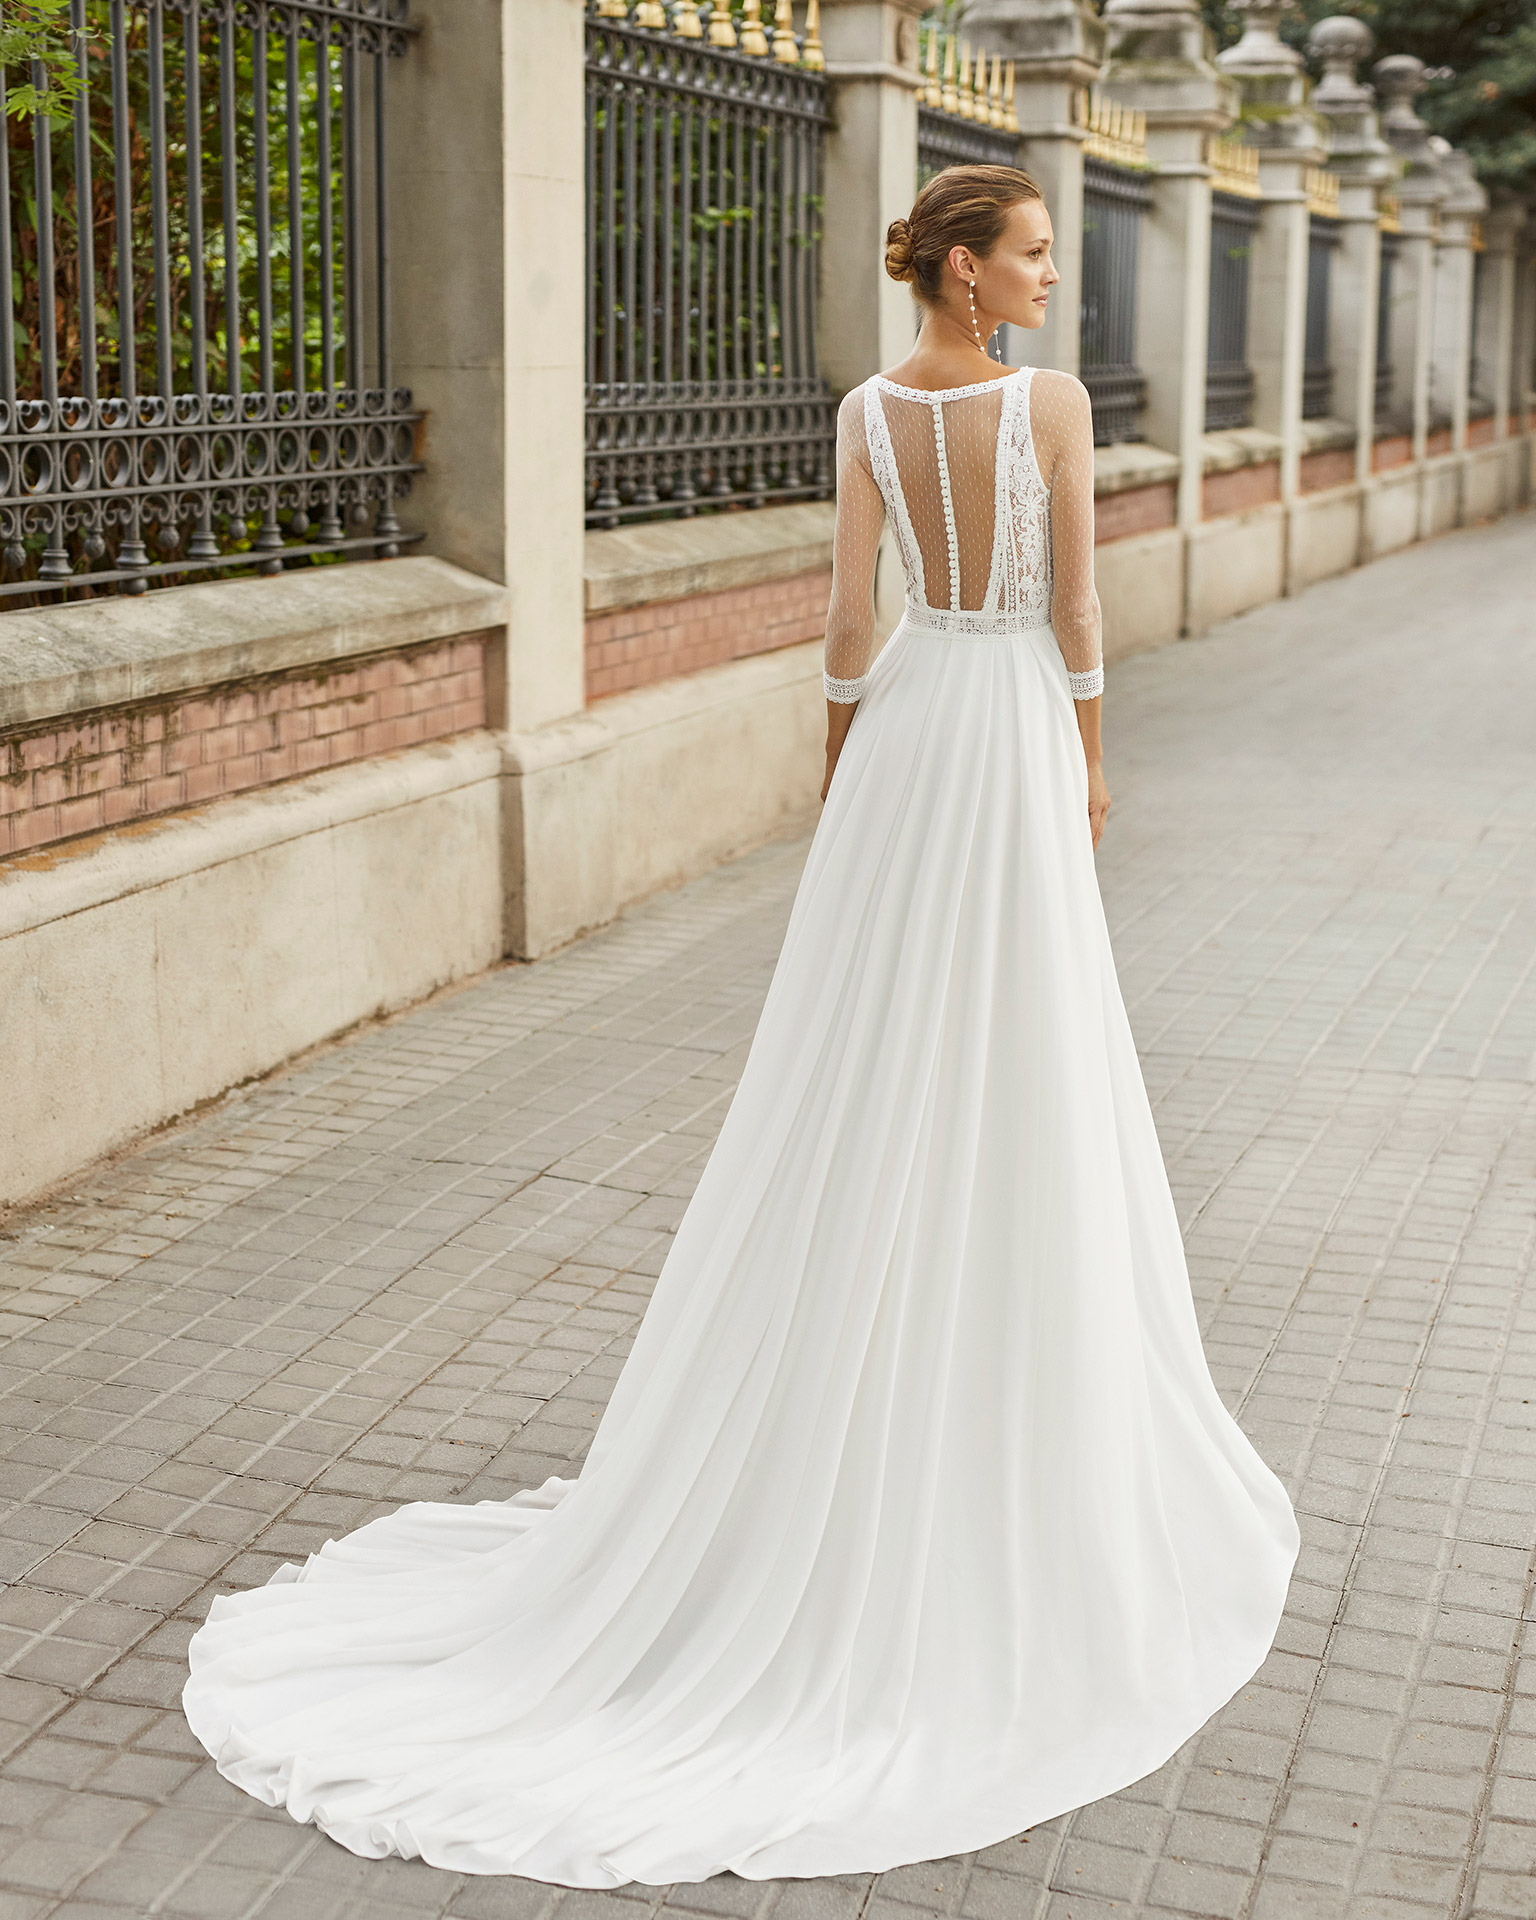 Lightweight wedding dress in georgette and beaded lace. V-neck, 3/4-length sleeves and sheer back. 2022  Collection.